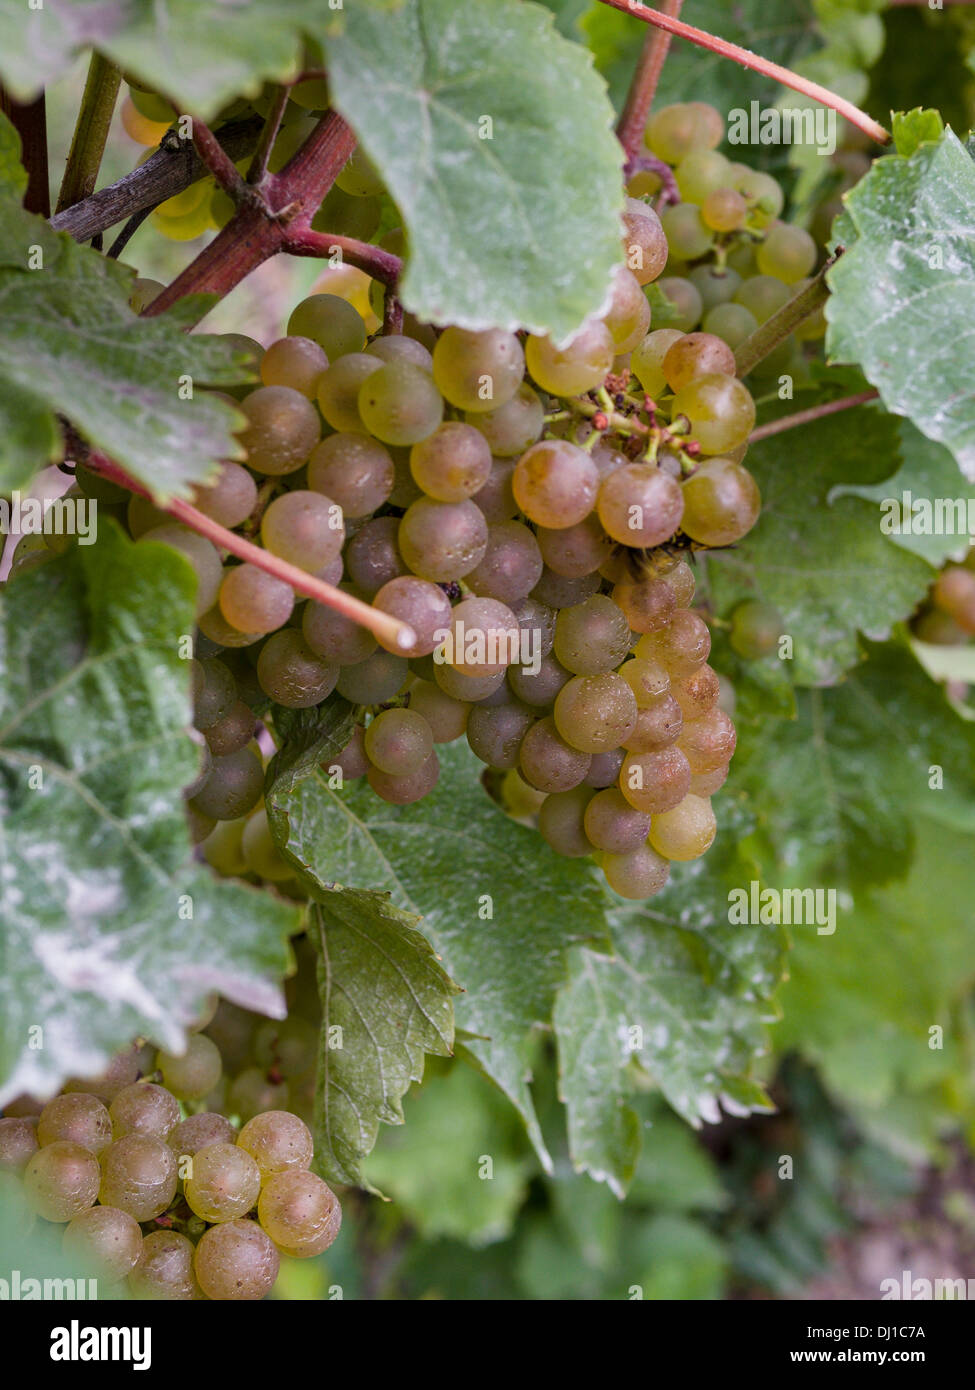 A bunch of Geisenheim grapes on the vine. A blush coloured grape ripens on the vine. Stock Photo